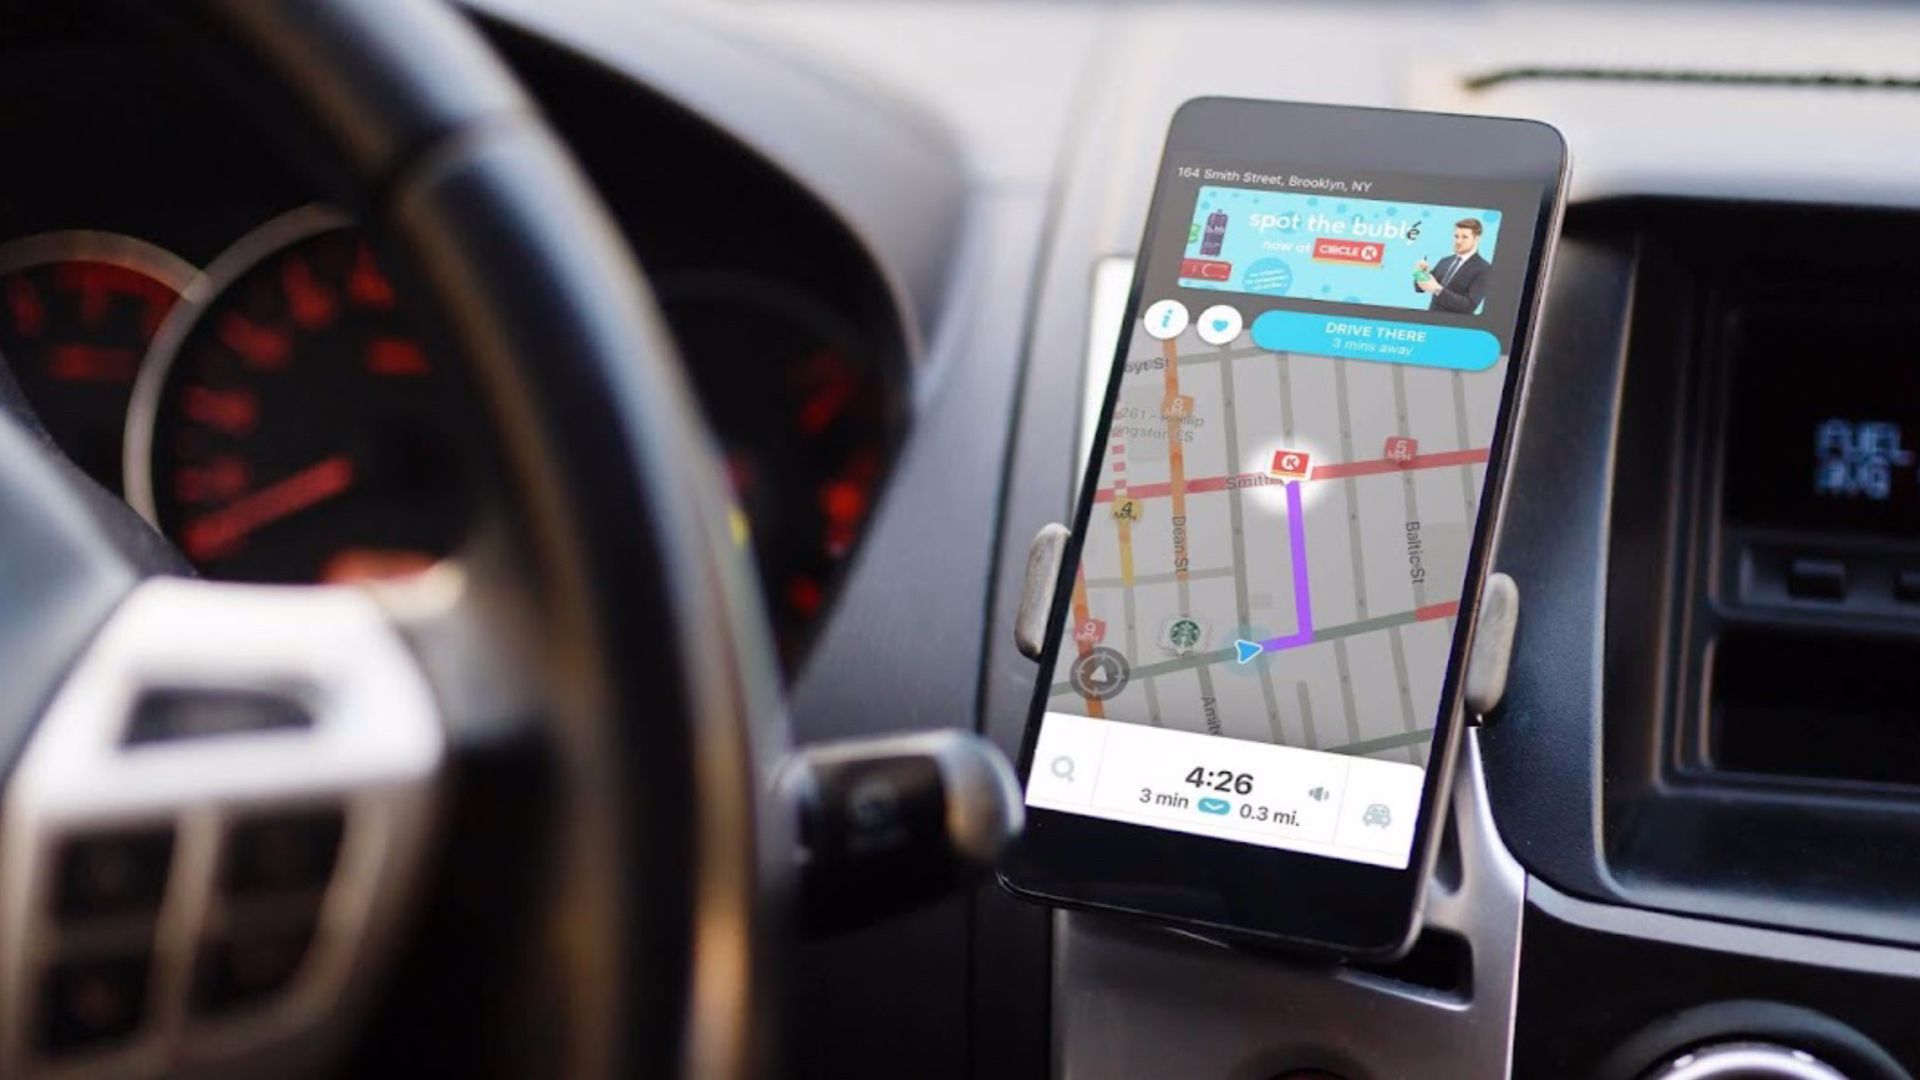 The Waze app in use placed in an car interior